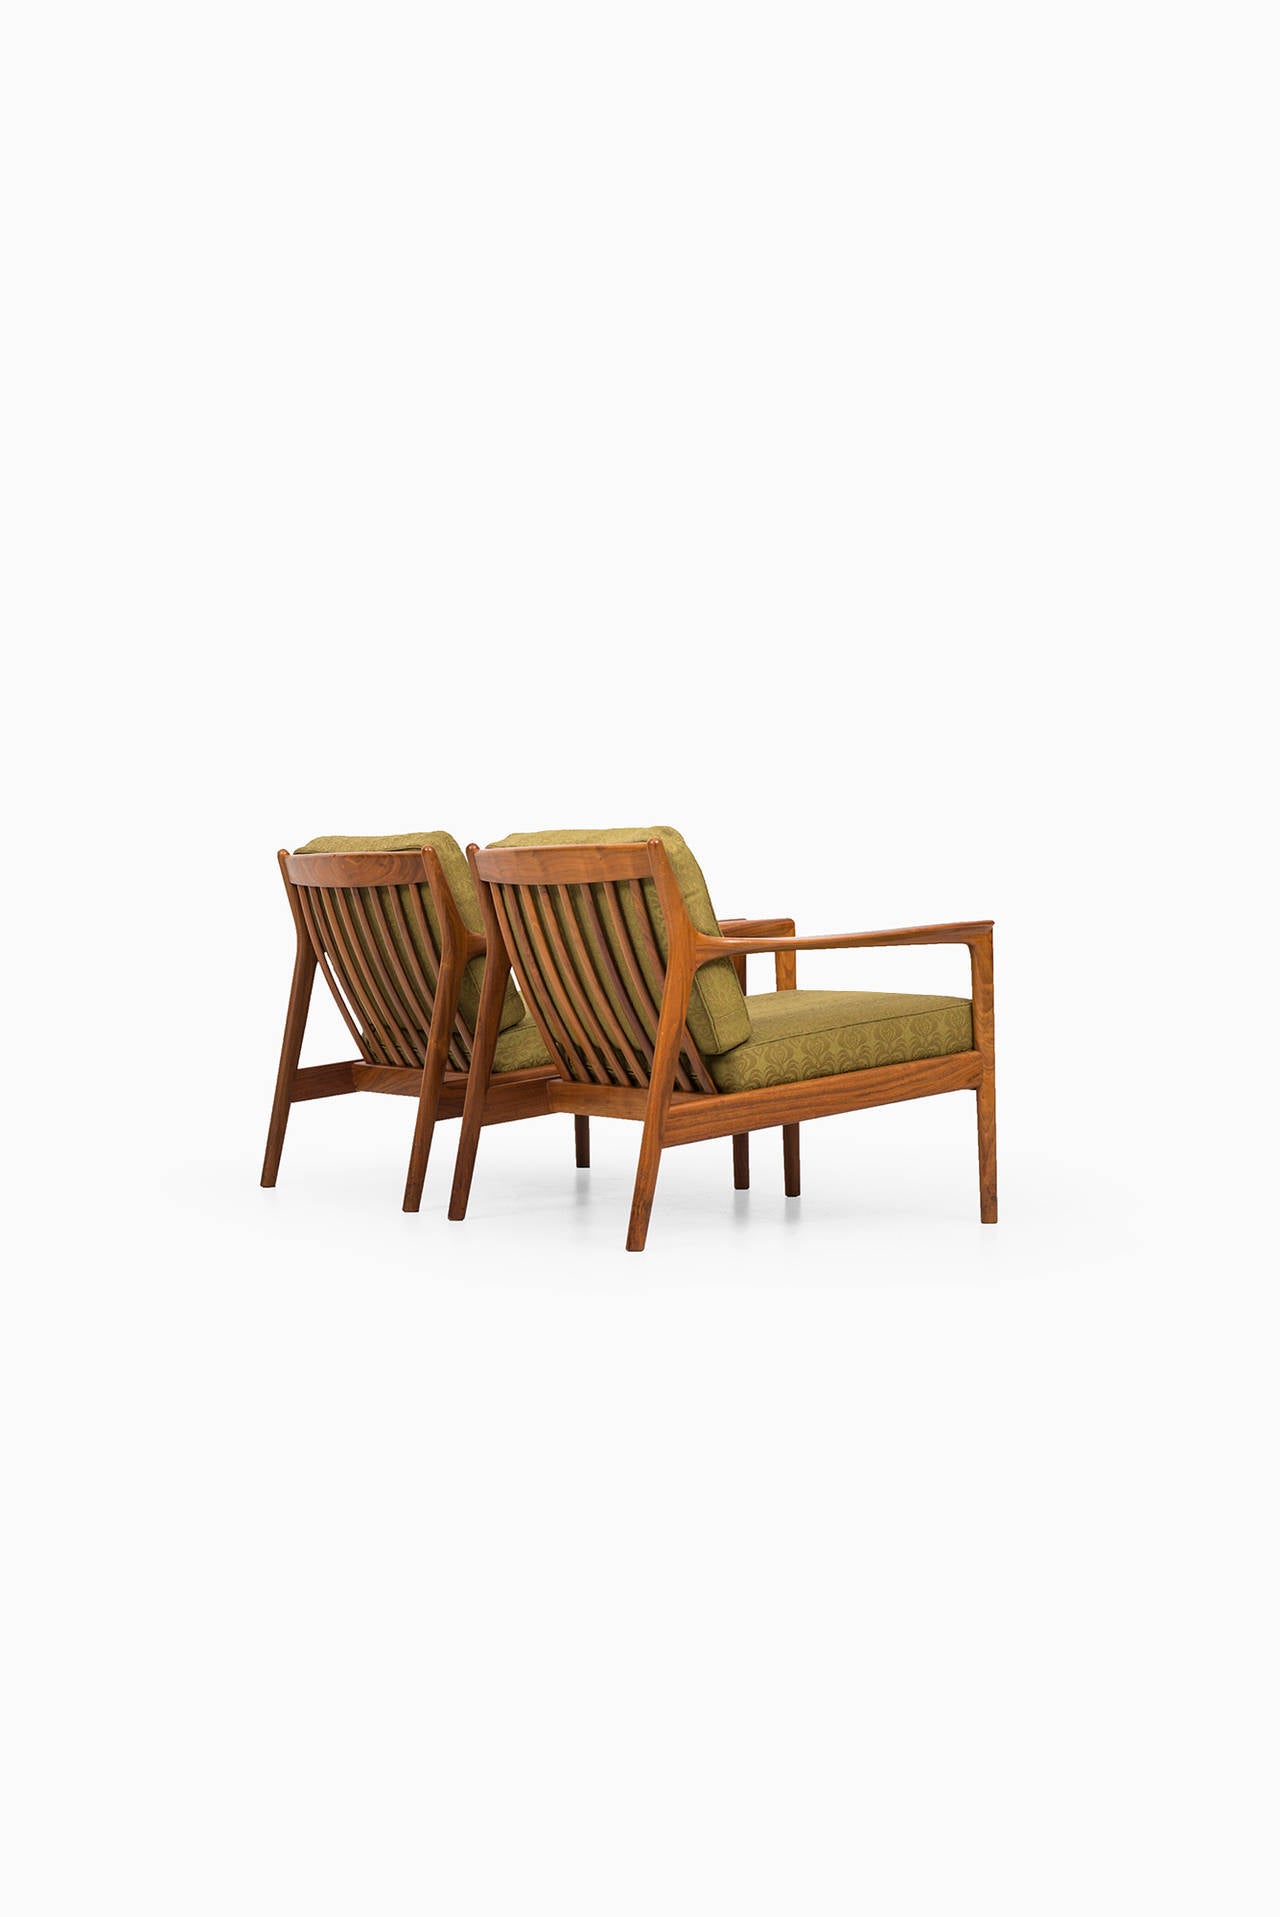 Swedish Folke Ohlsson Easy Chairs, Model USA-75, by Dux in Sweden